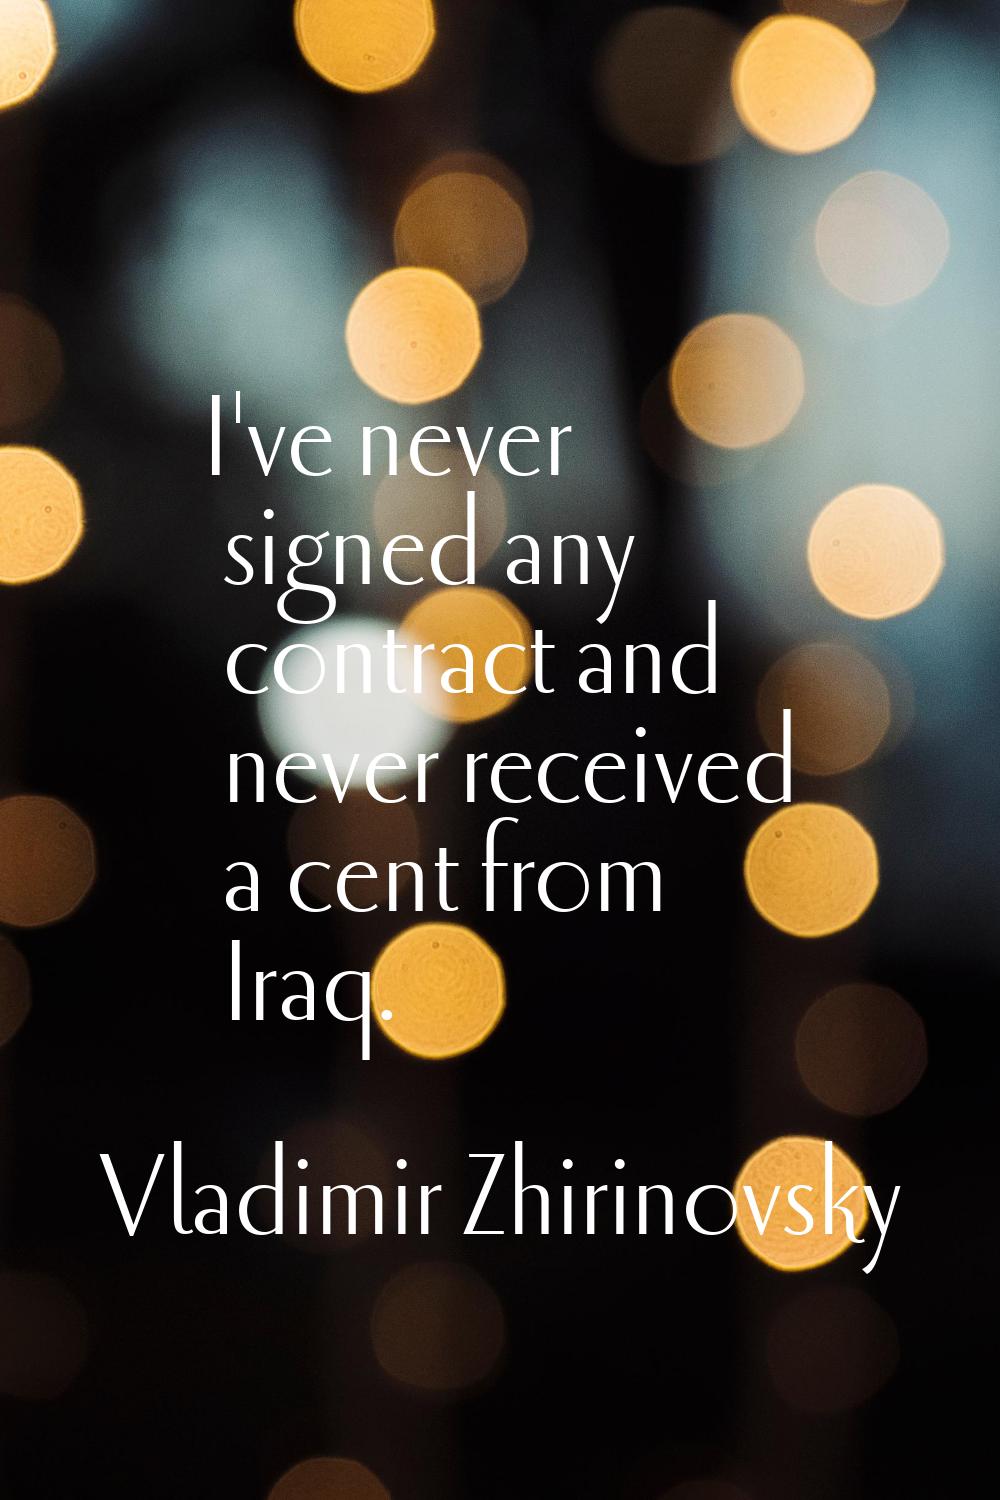 I've never signed any contract and never received a cent from Iraq.